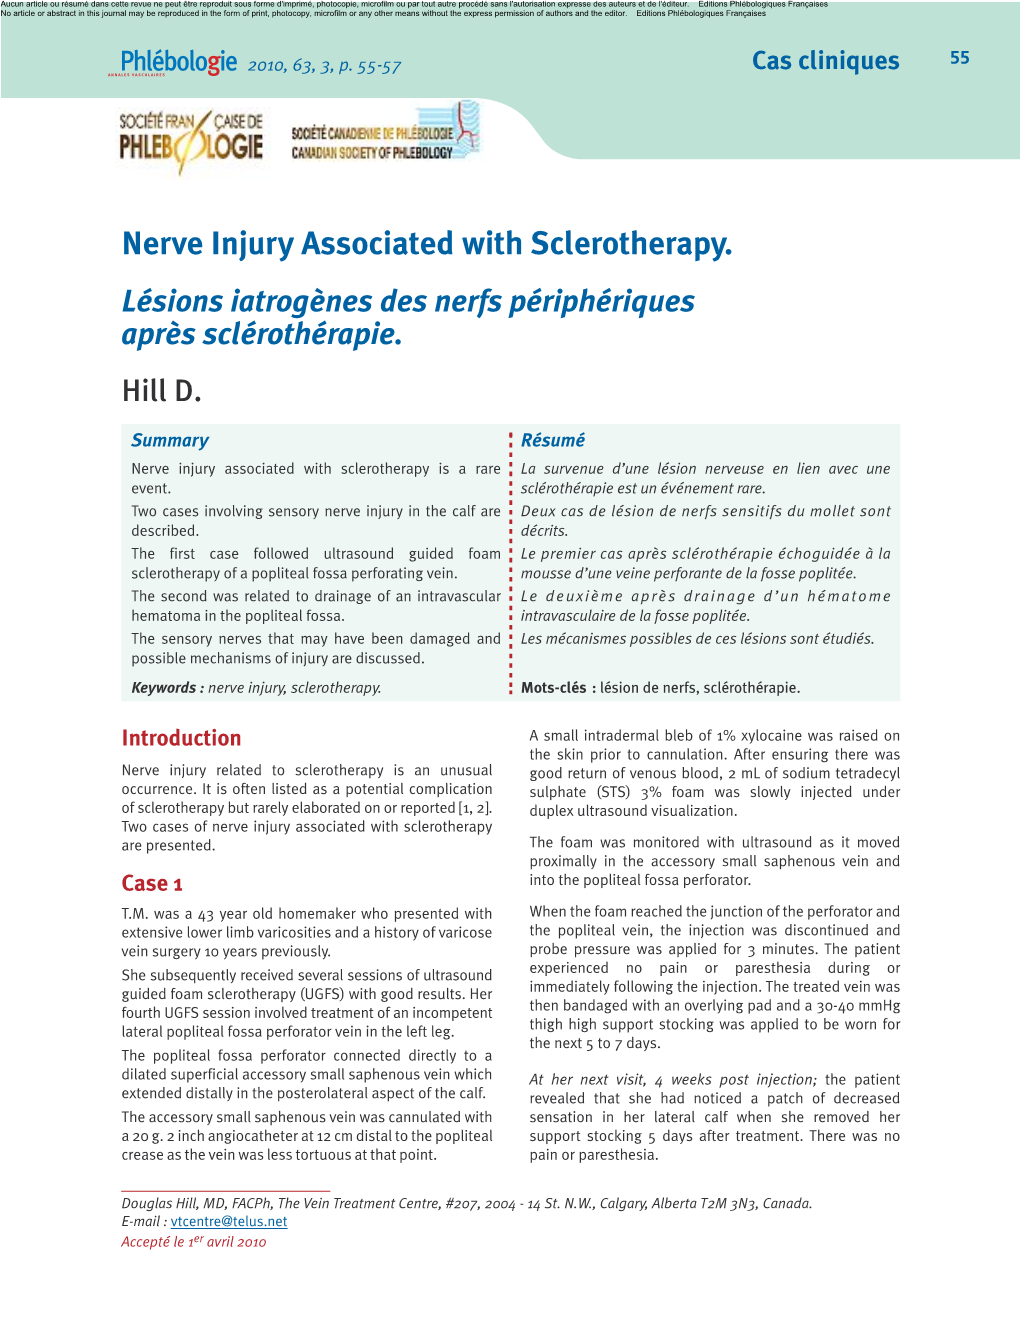 Nerve Injury Associated with Sclerotherapy